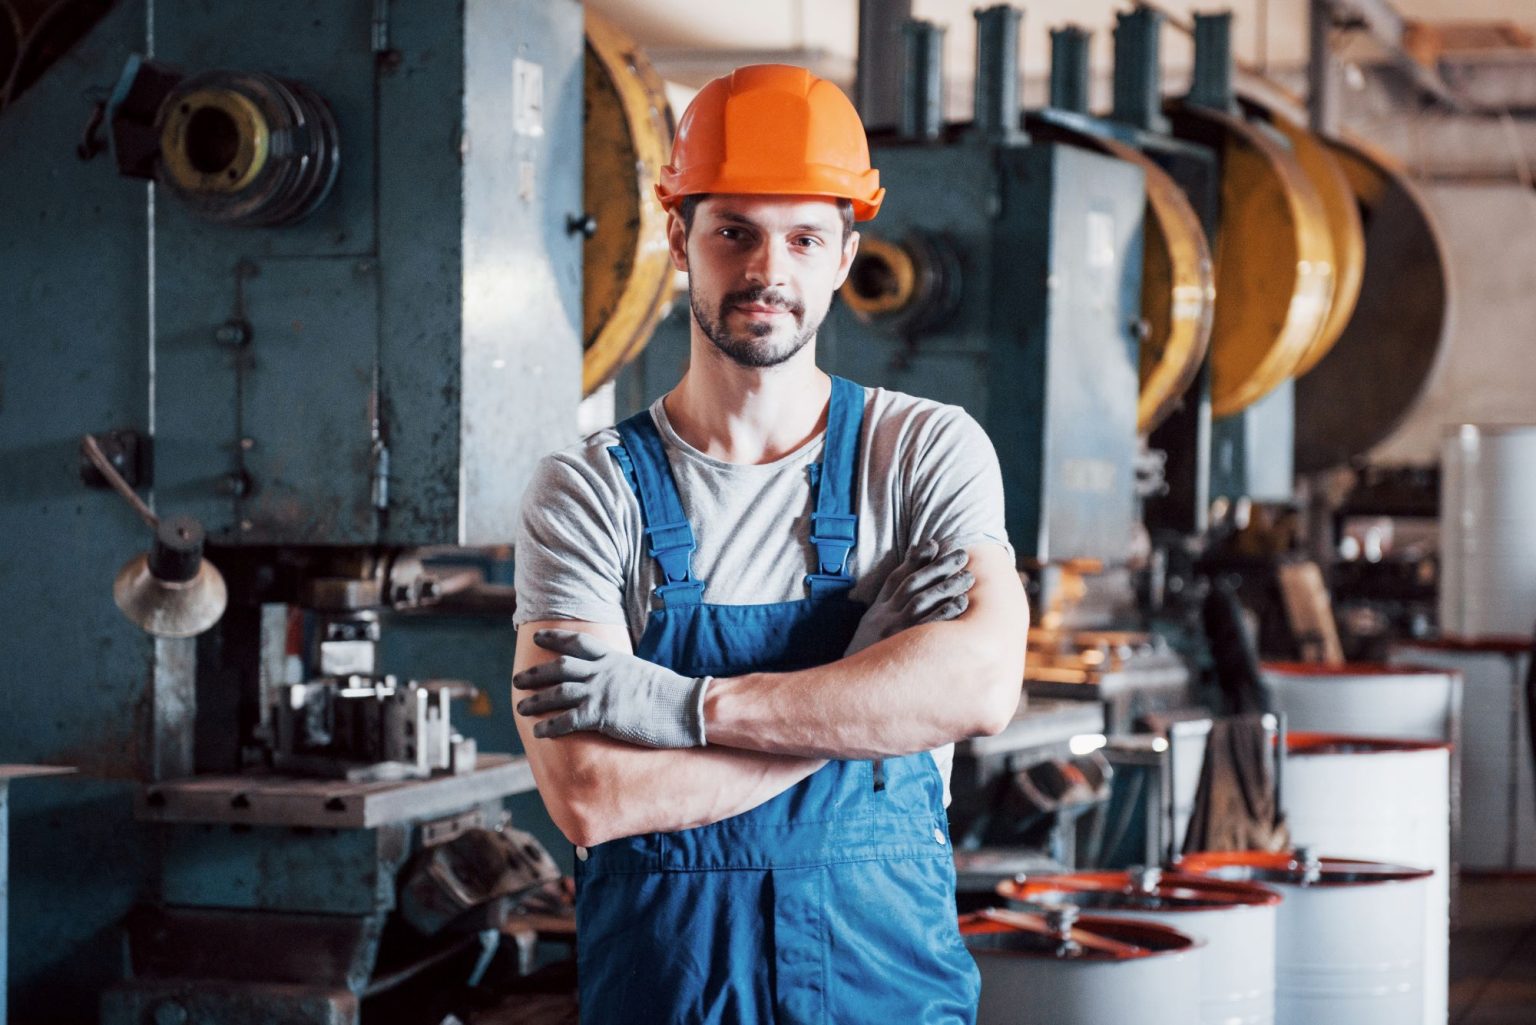 portrait-young-worker-hard-hat-large-metalworking-plant